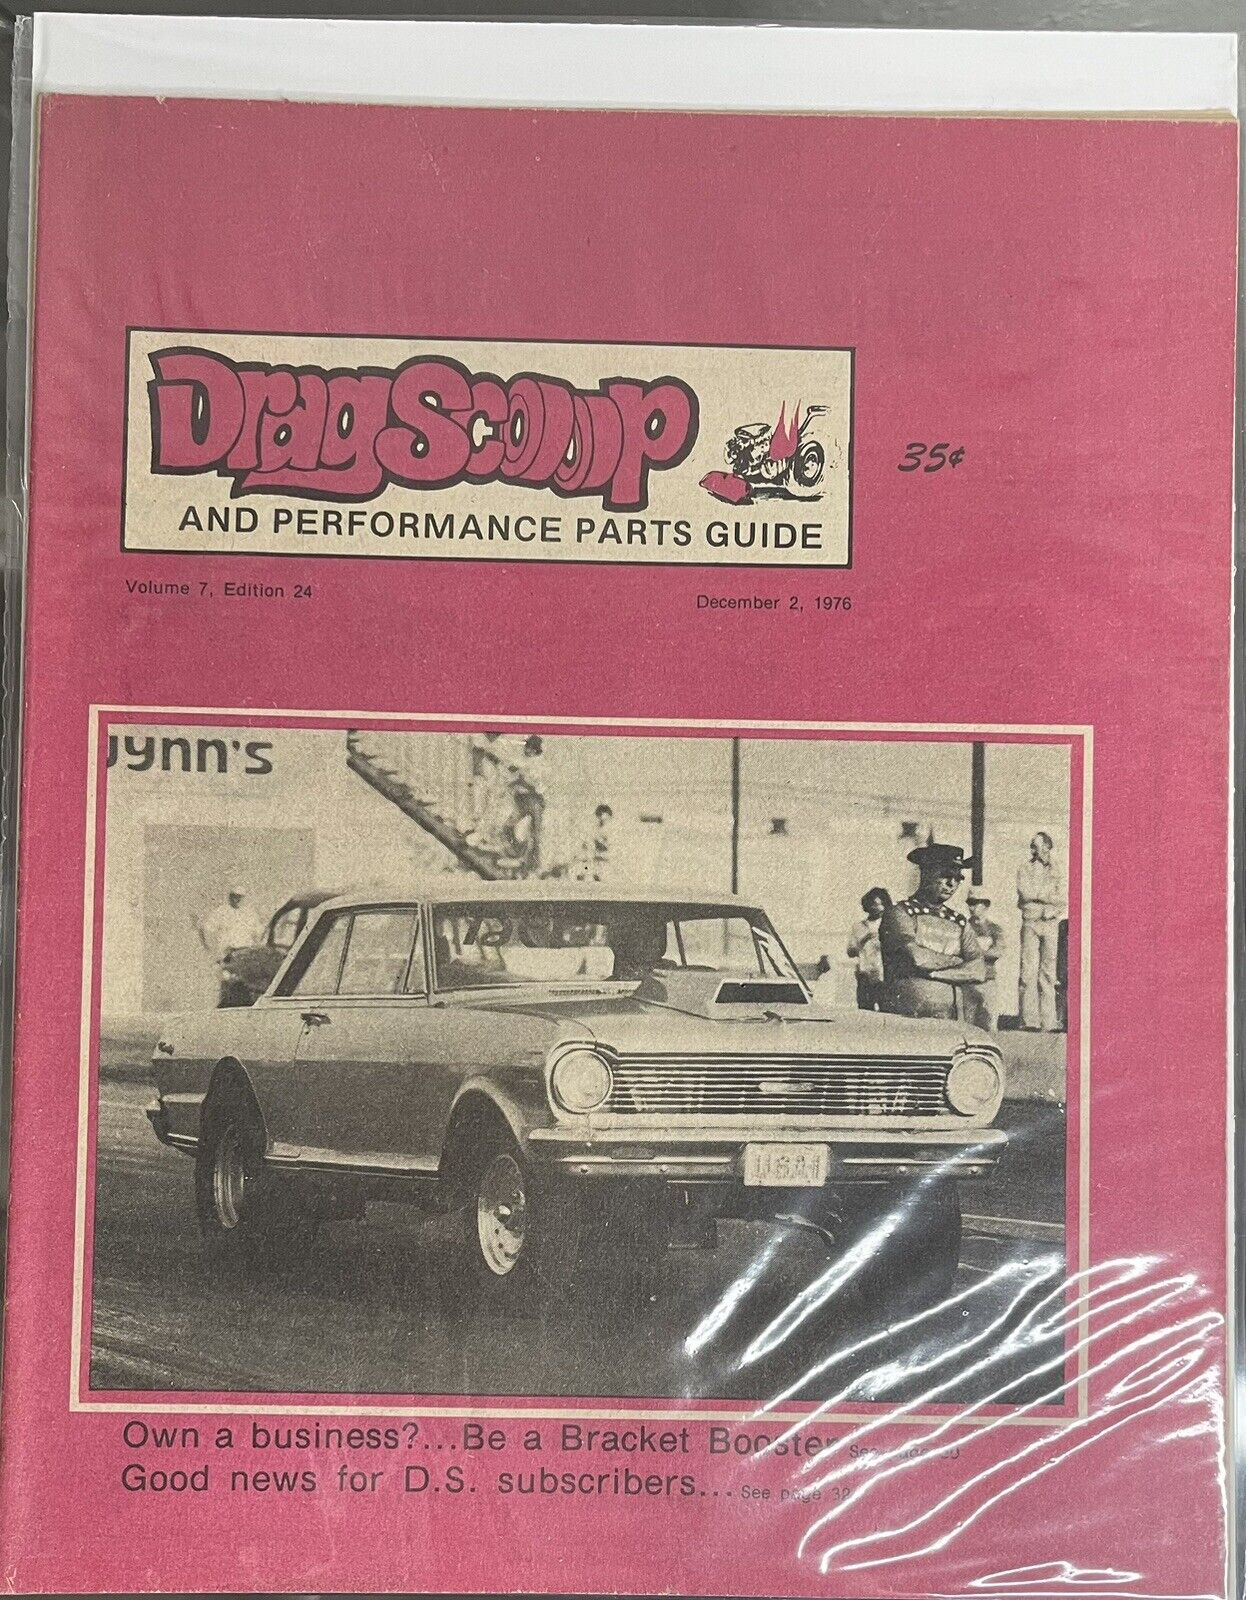 DragScoop and Performance Parts Guide Volume 7 Edition 24 *Original* *Sealed*